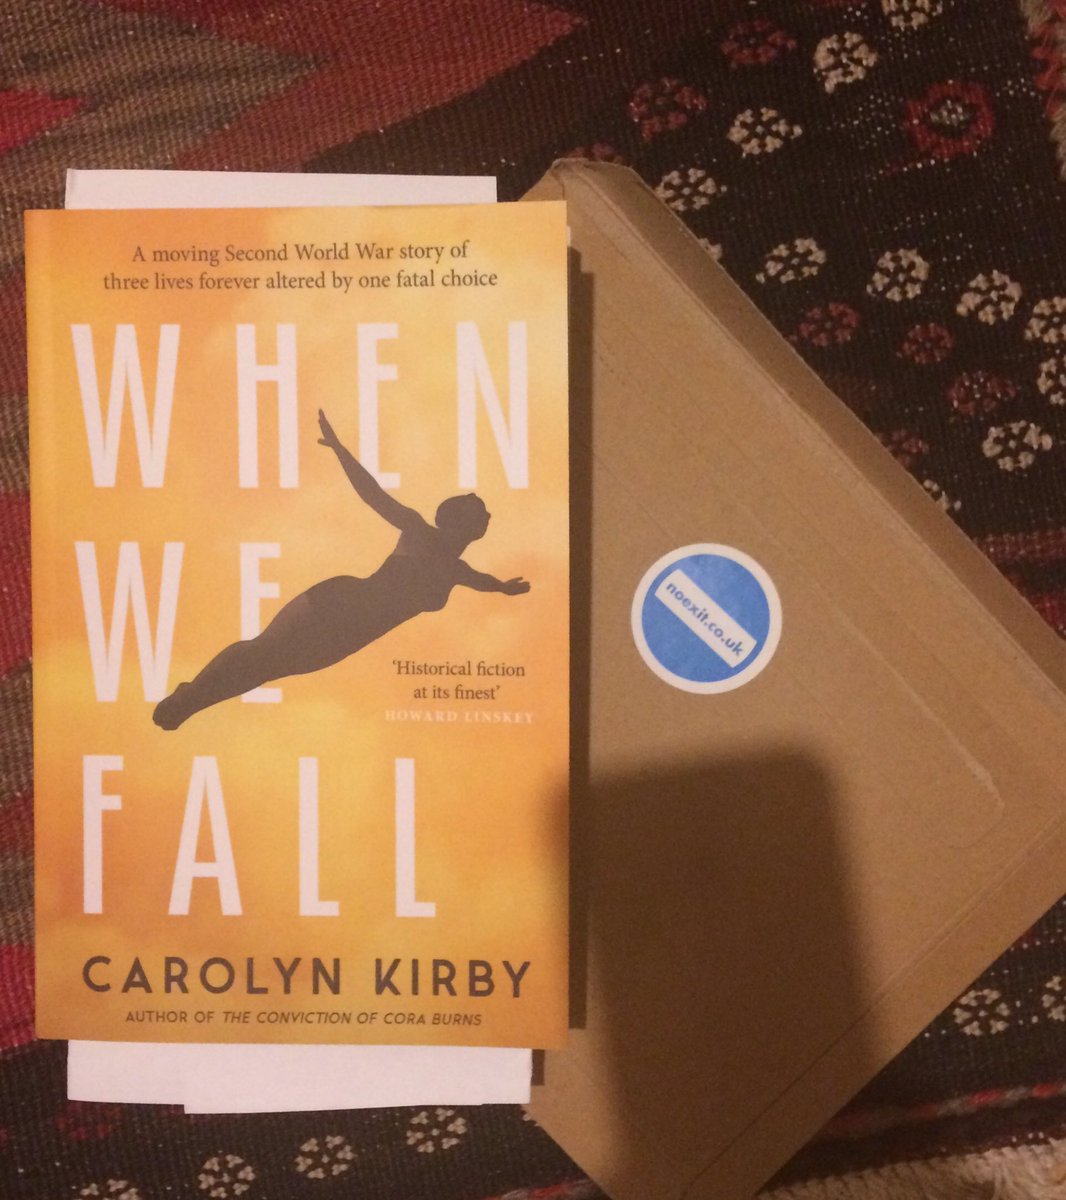 Thank you @noexitpress press for this cardboard-packed copy of #WhenWeFall Set during WW2 and based in part on a true story by #CarolynKirby author of the excellent #TheConvictionofCoraBurns